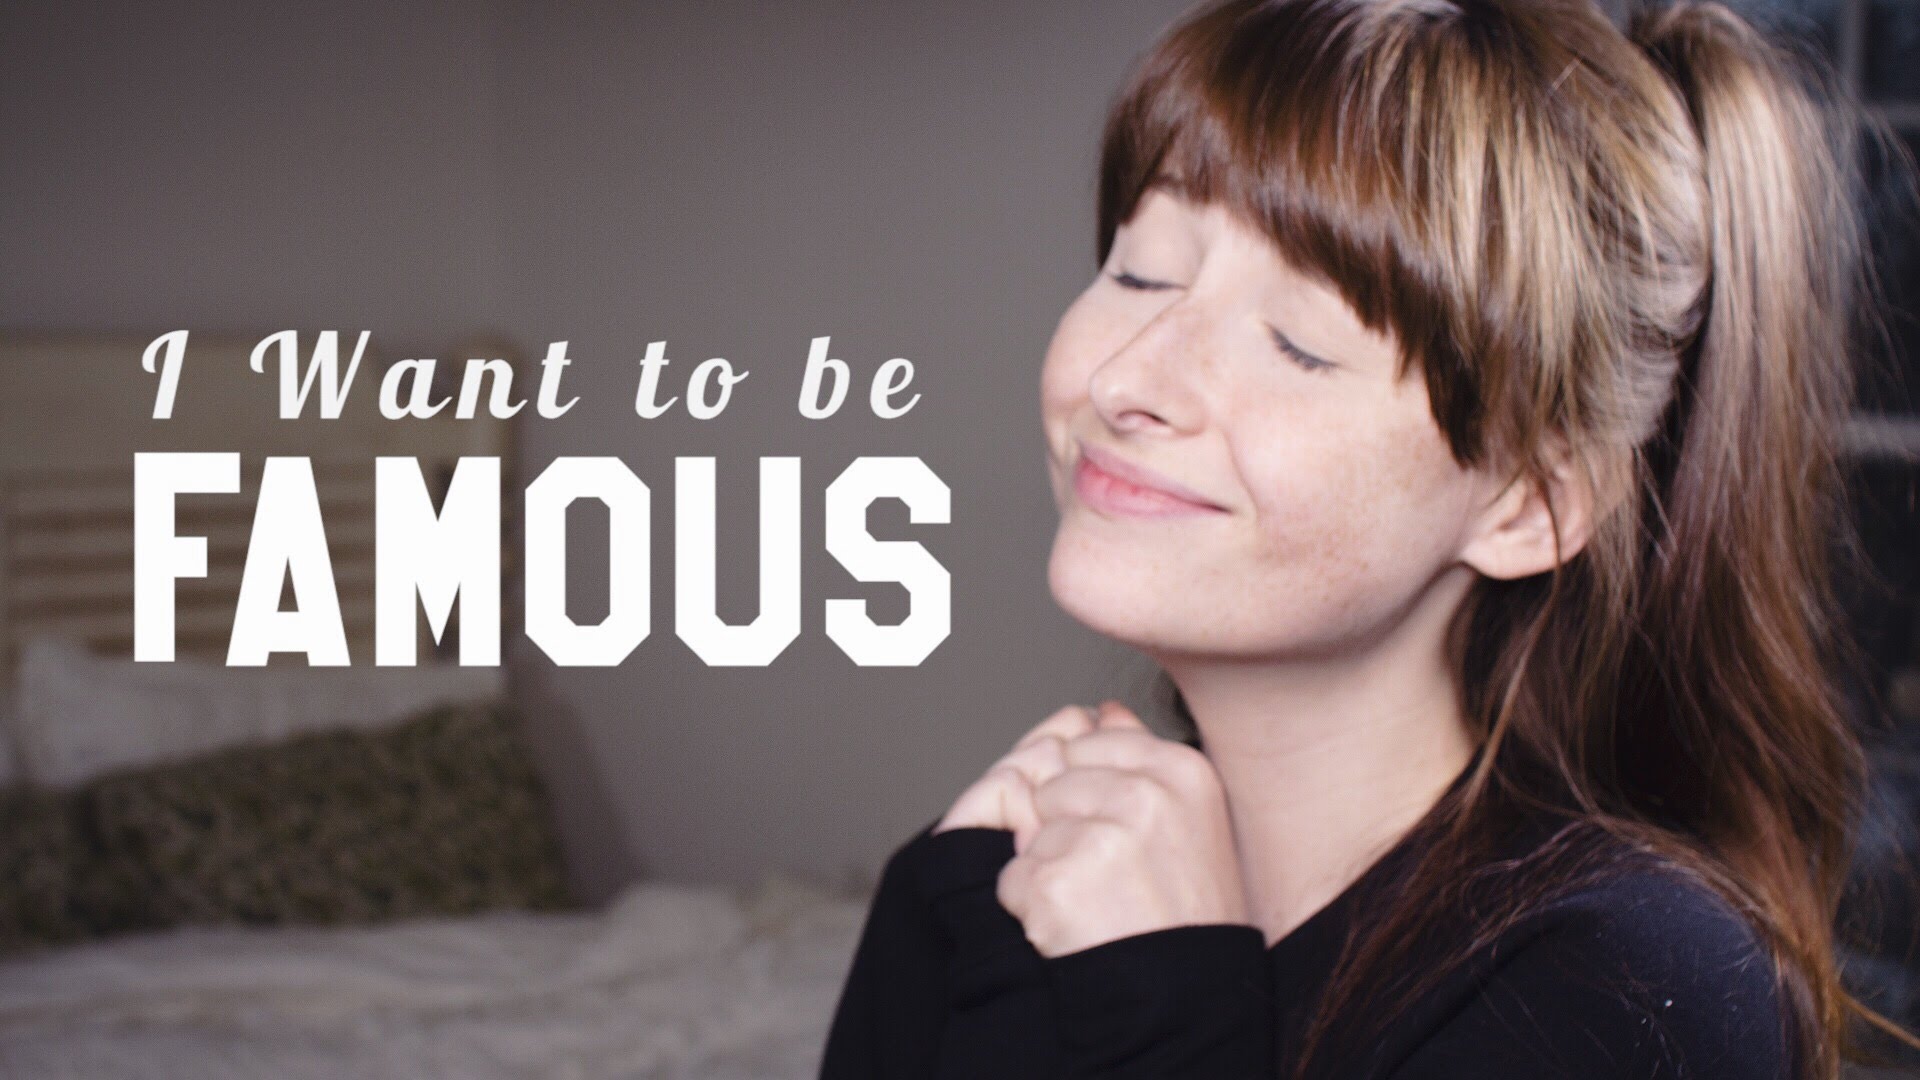 I Want to be Famous (no, really) - YouTube